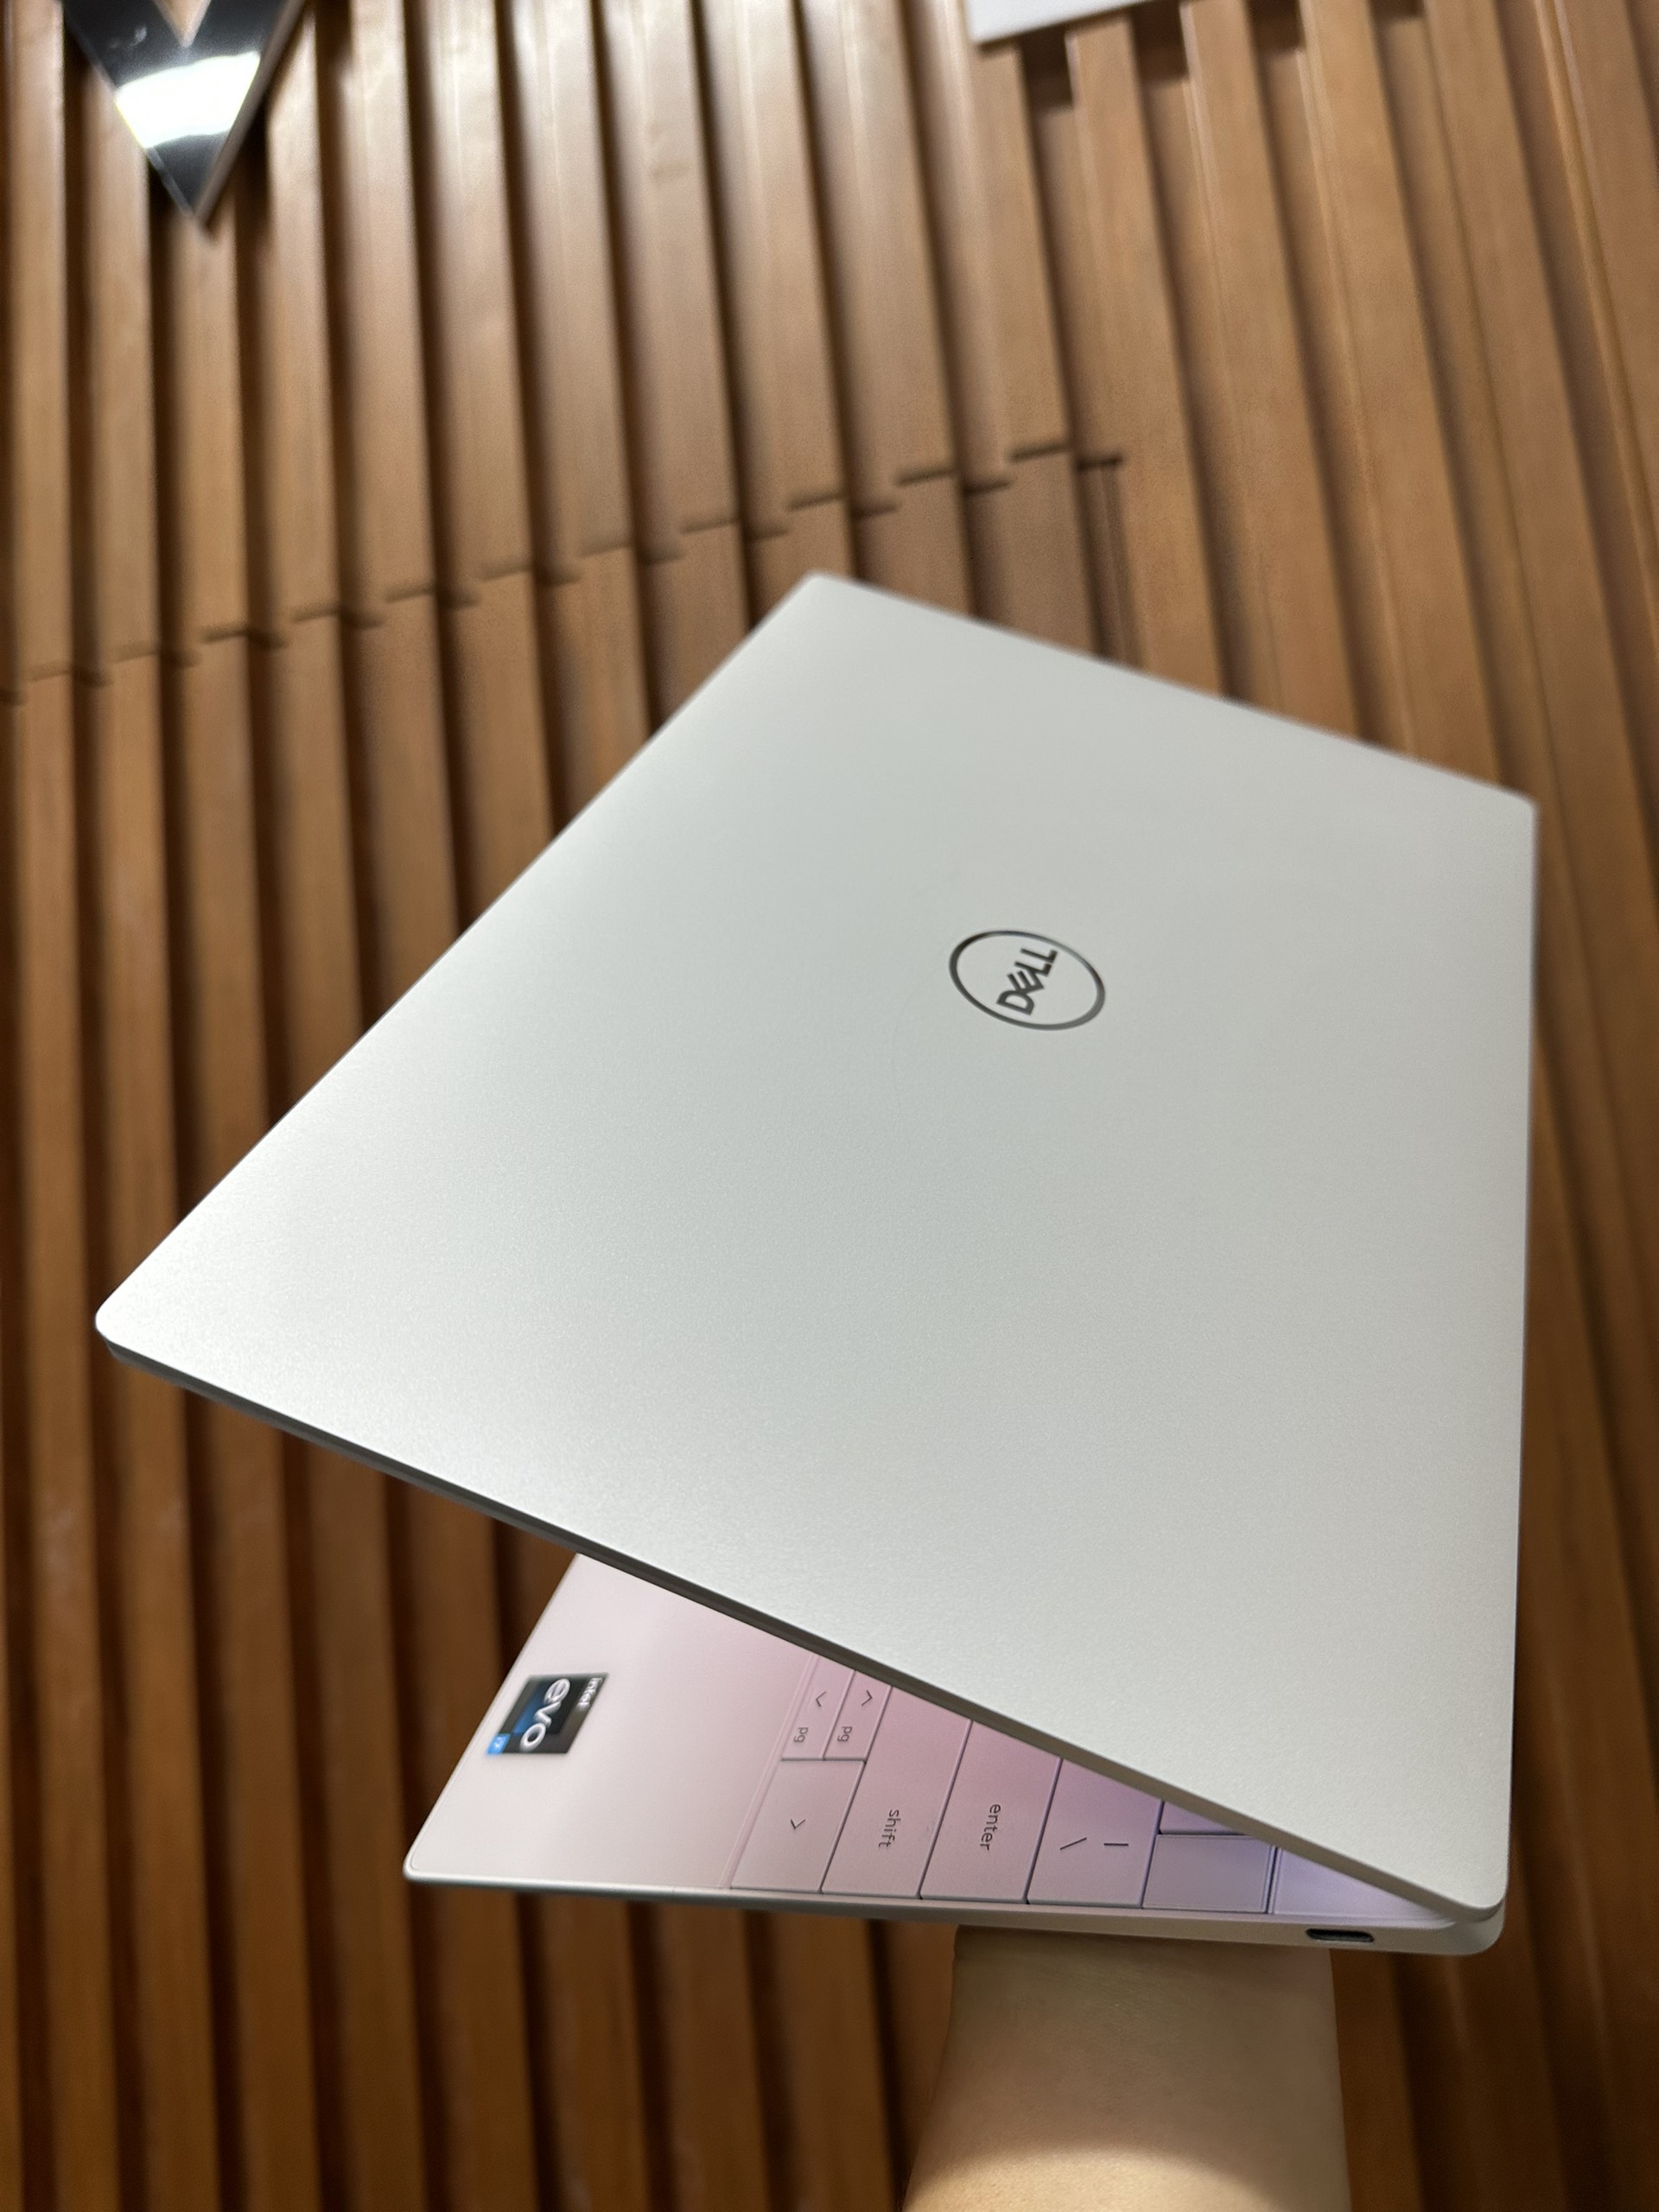 Dell-XPS-13-Plus-9320-Core-i7-m%C3%A0n-3.5K-Oled-anh-1.jpg